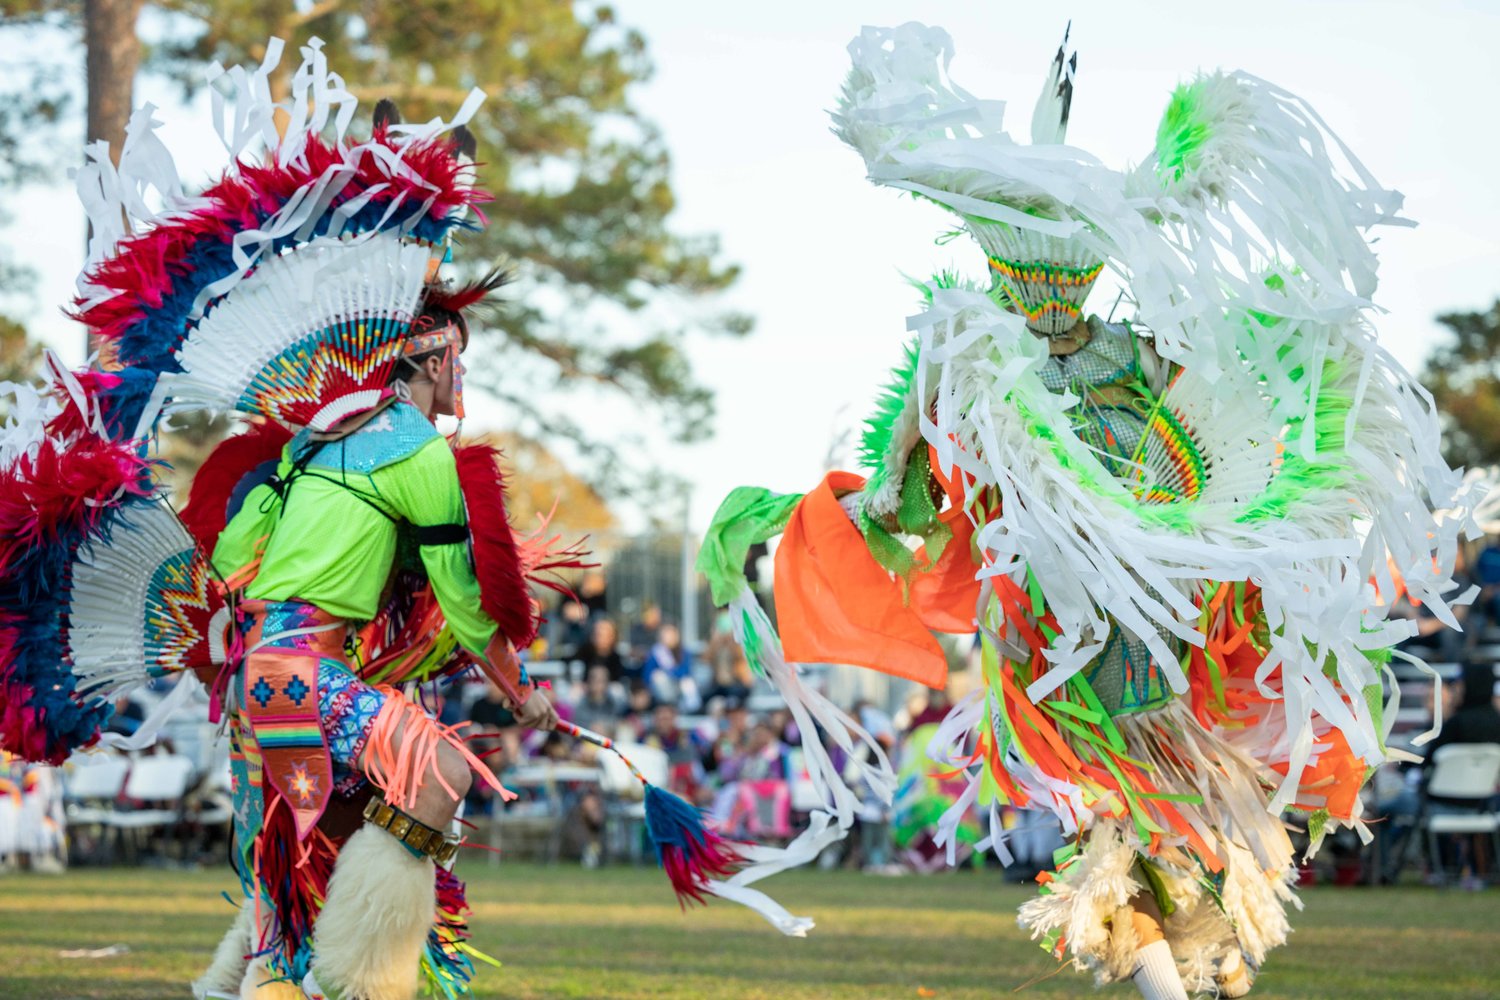 The most popular event with visitors at the Pow Wow are the dance competitions where American Indians from over 20 Tribal Nations across the U.S. perform indigenous dances in authentic regalia. Both entertaining and educational, the dance competitions feature four age categories and several different styles of dance.